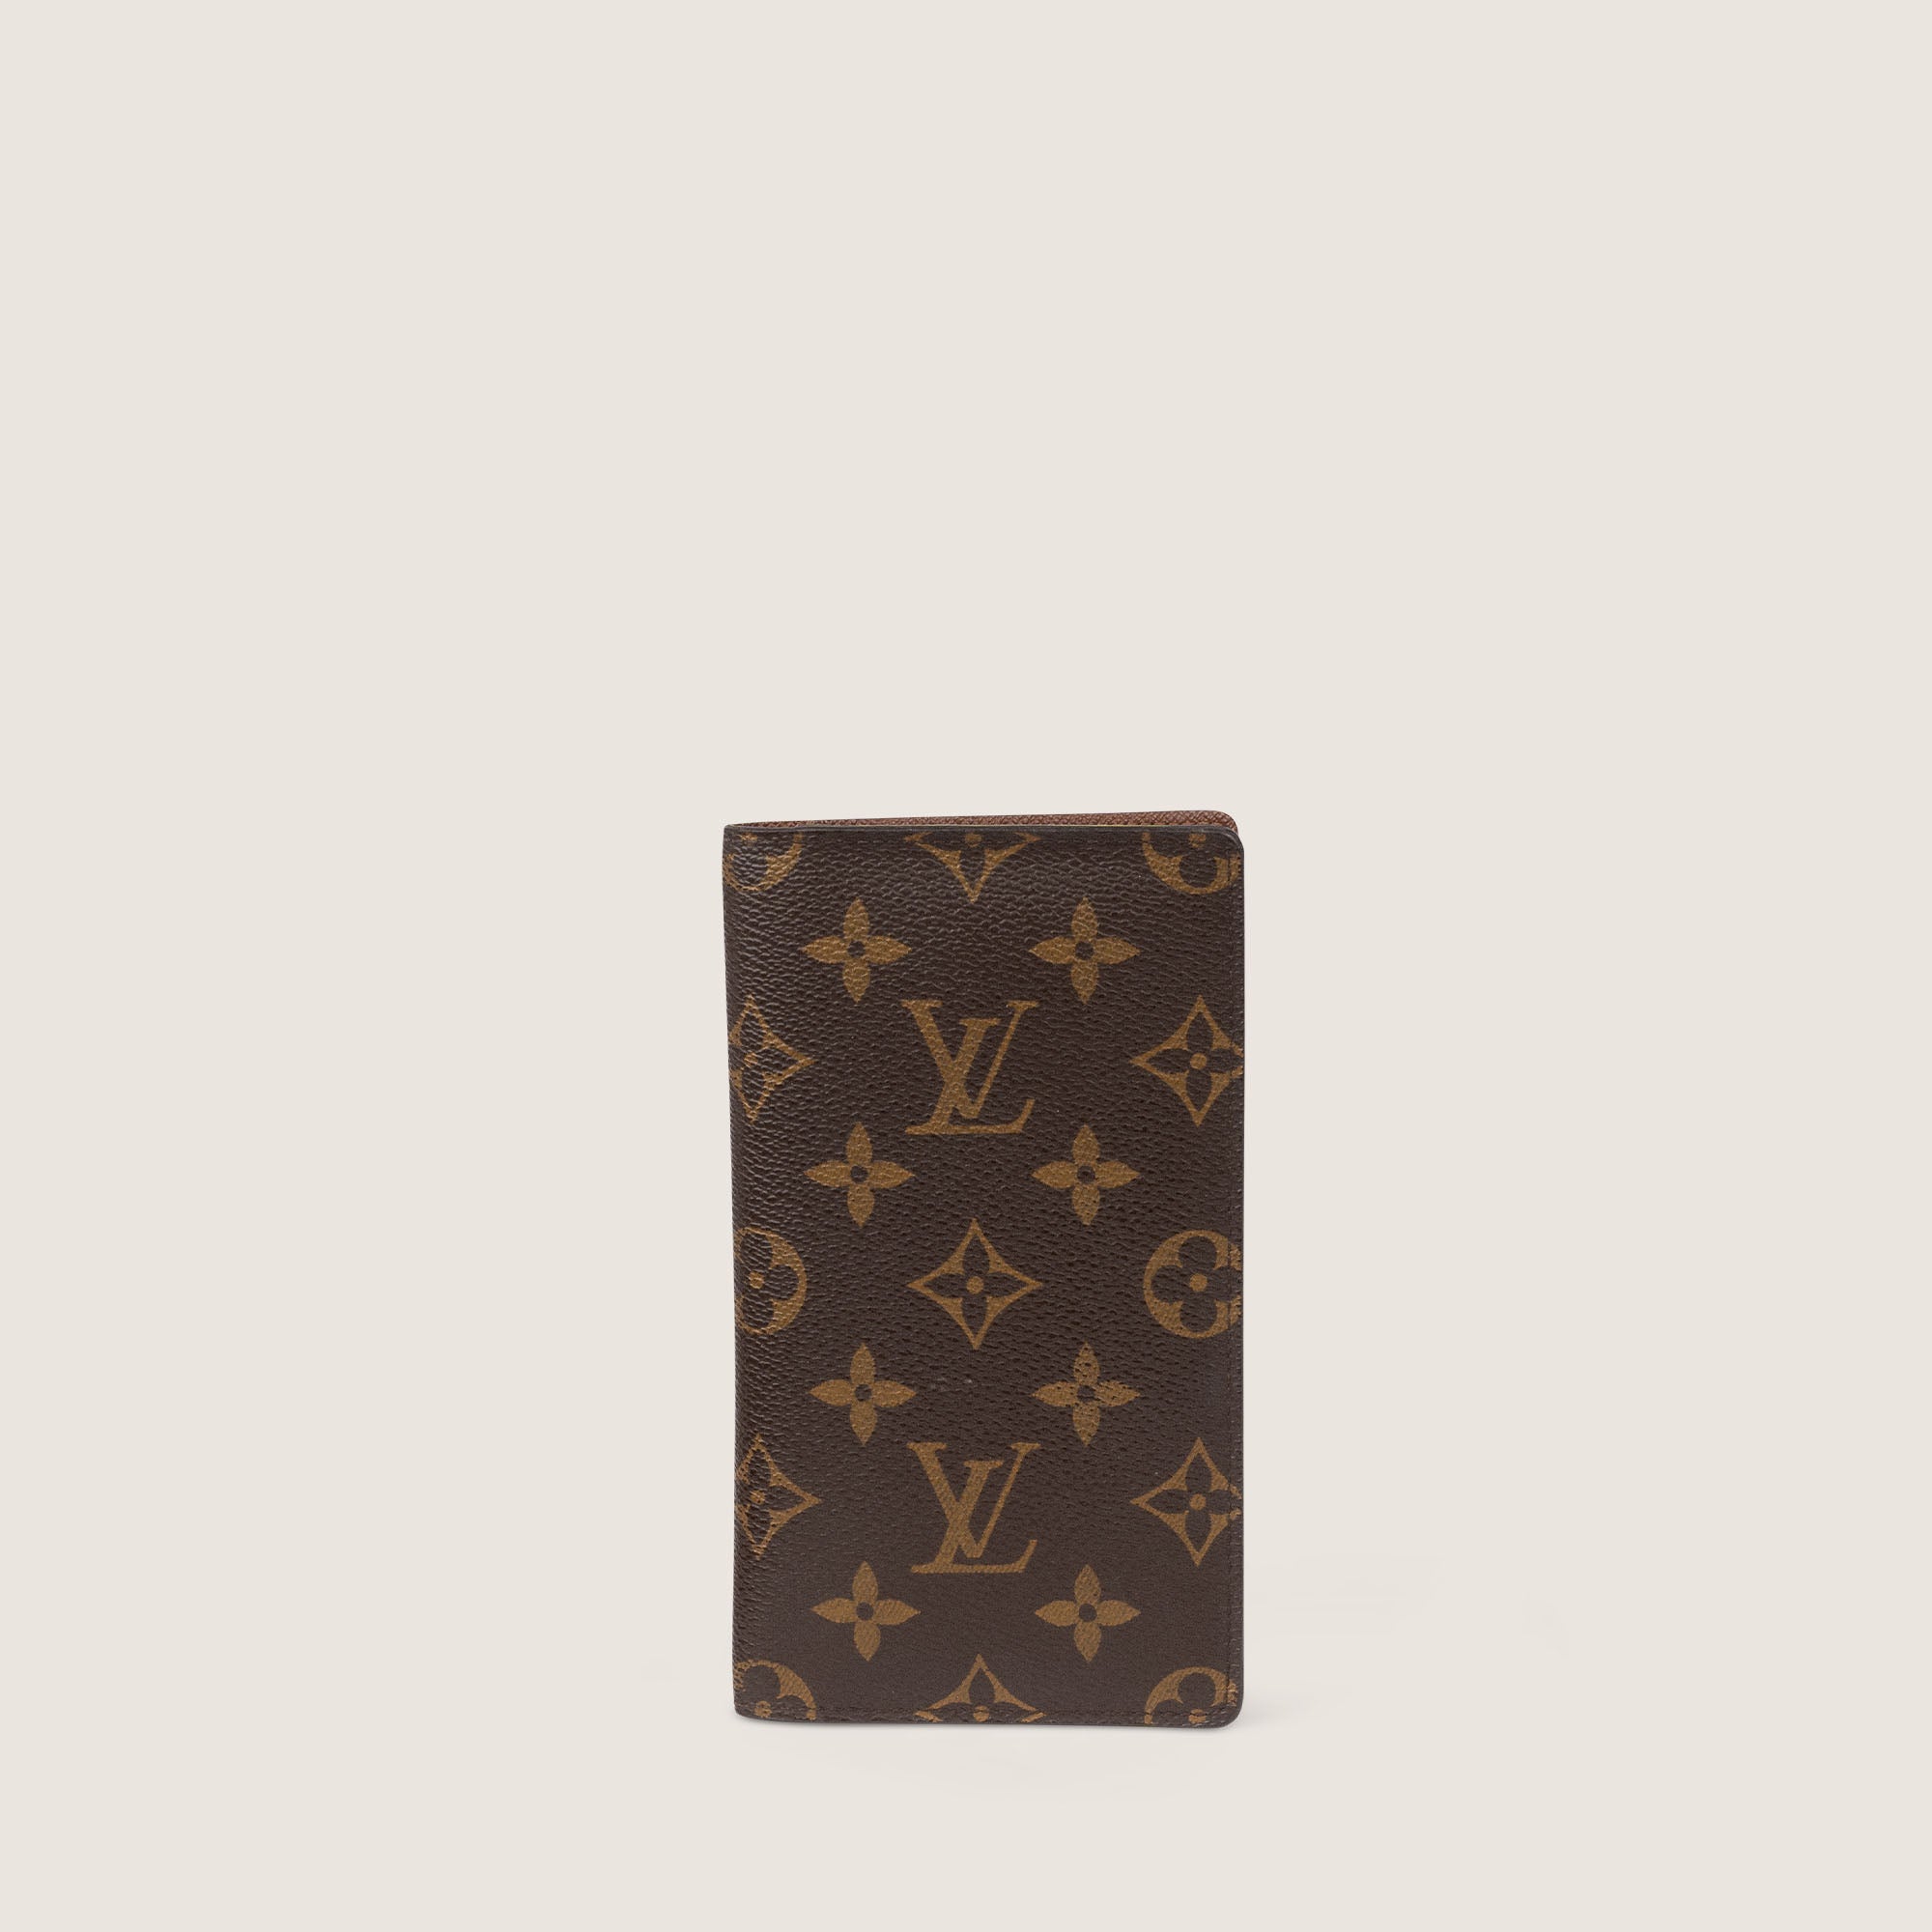 Pocket Agenda Cover - LOUIS VUITTON - Affordable Luxury image